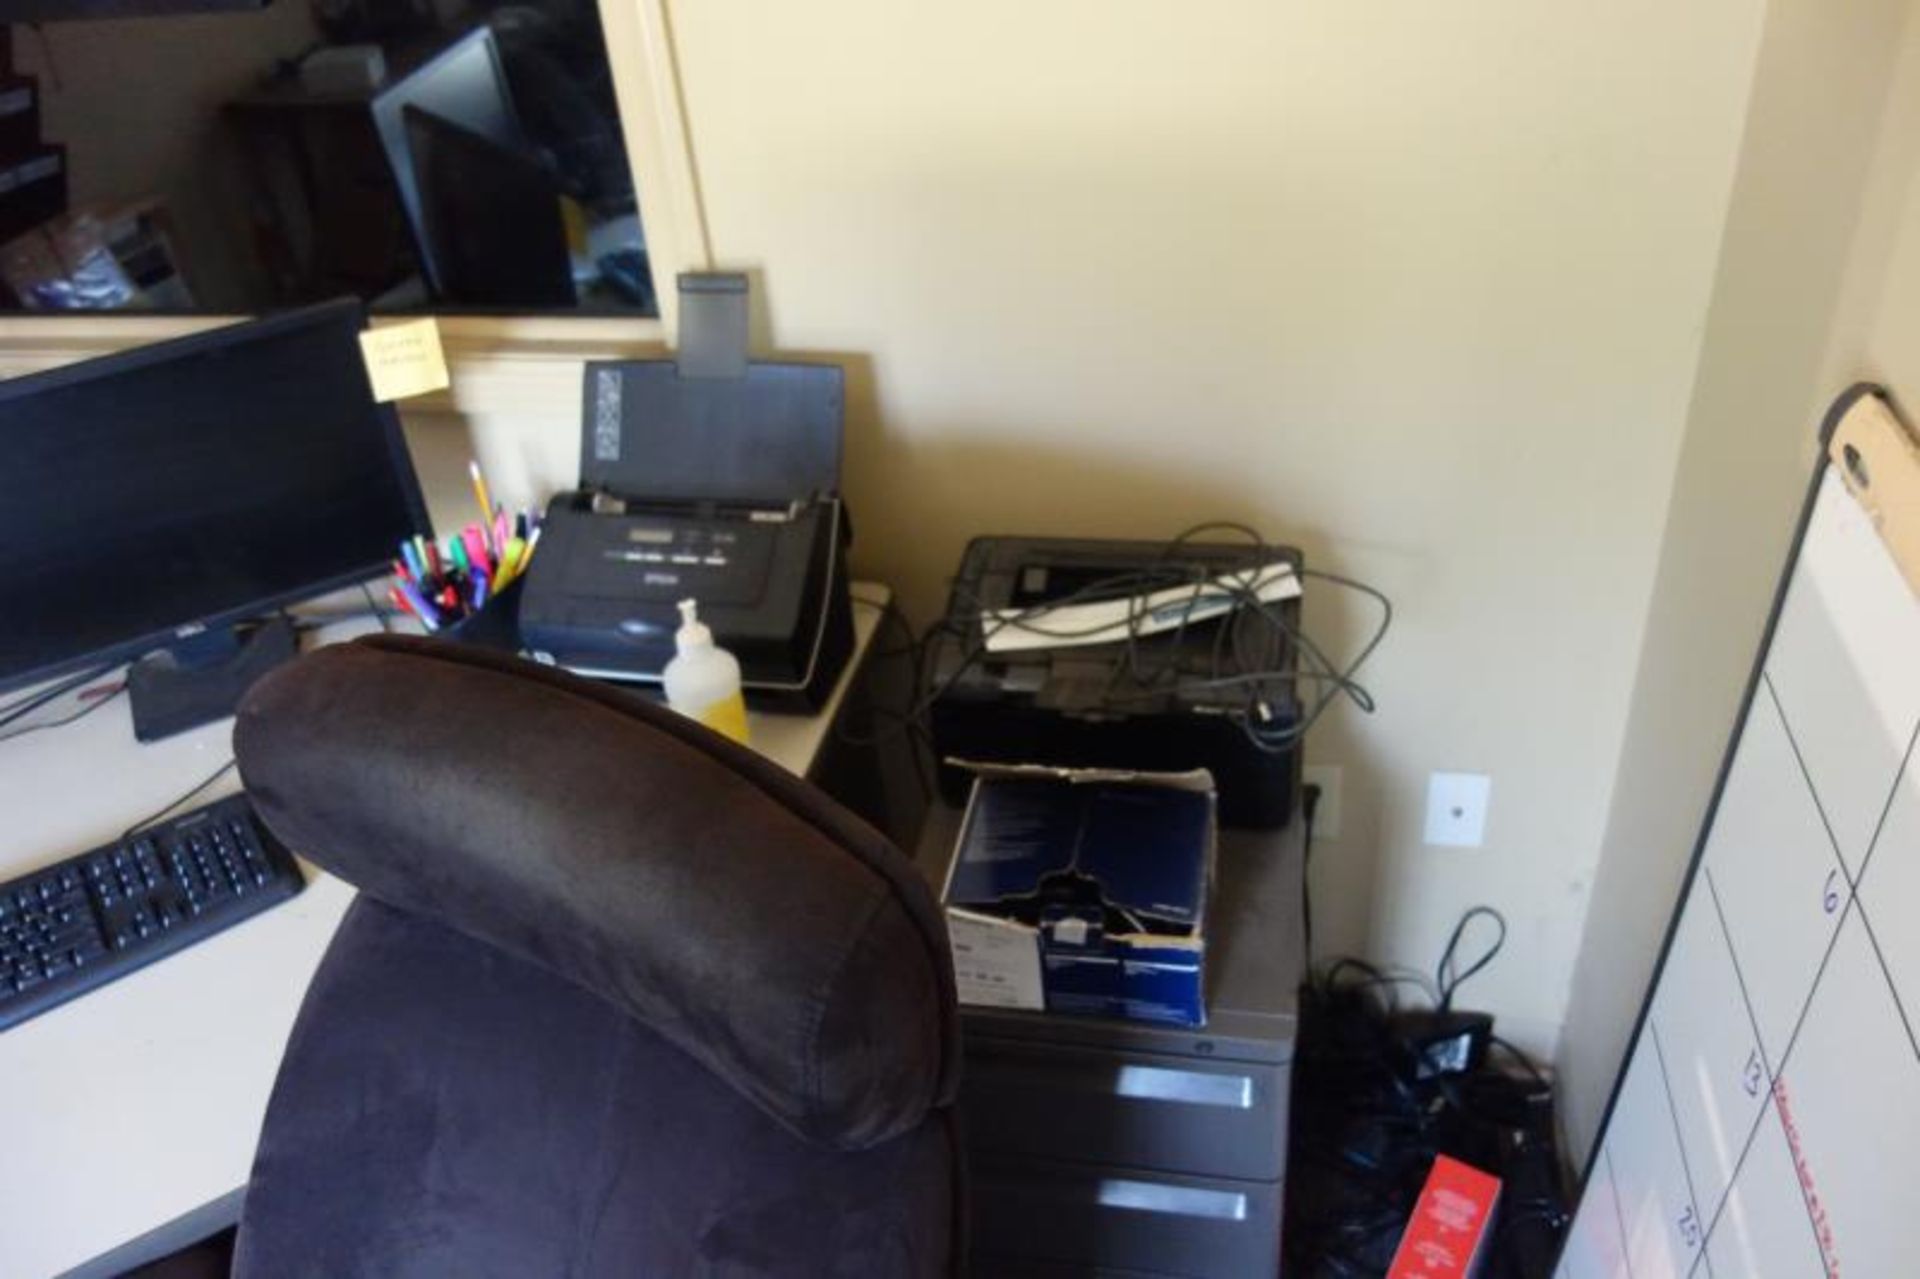 Contents of Warehouse Office - Desk, Chairs, Epson GT-585 Scanner, HP LaserJet P1102W, (2) Dell Flat - Image 4 of 6